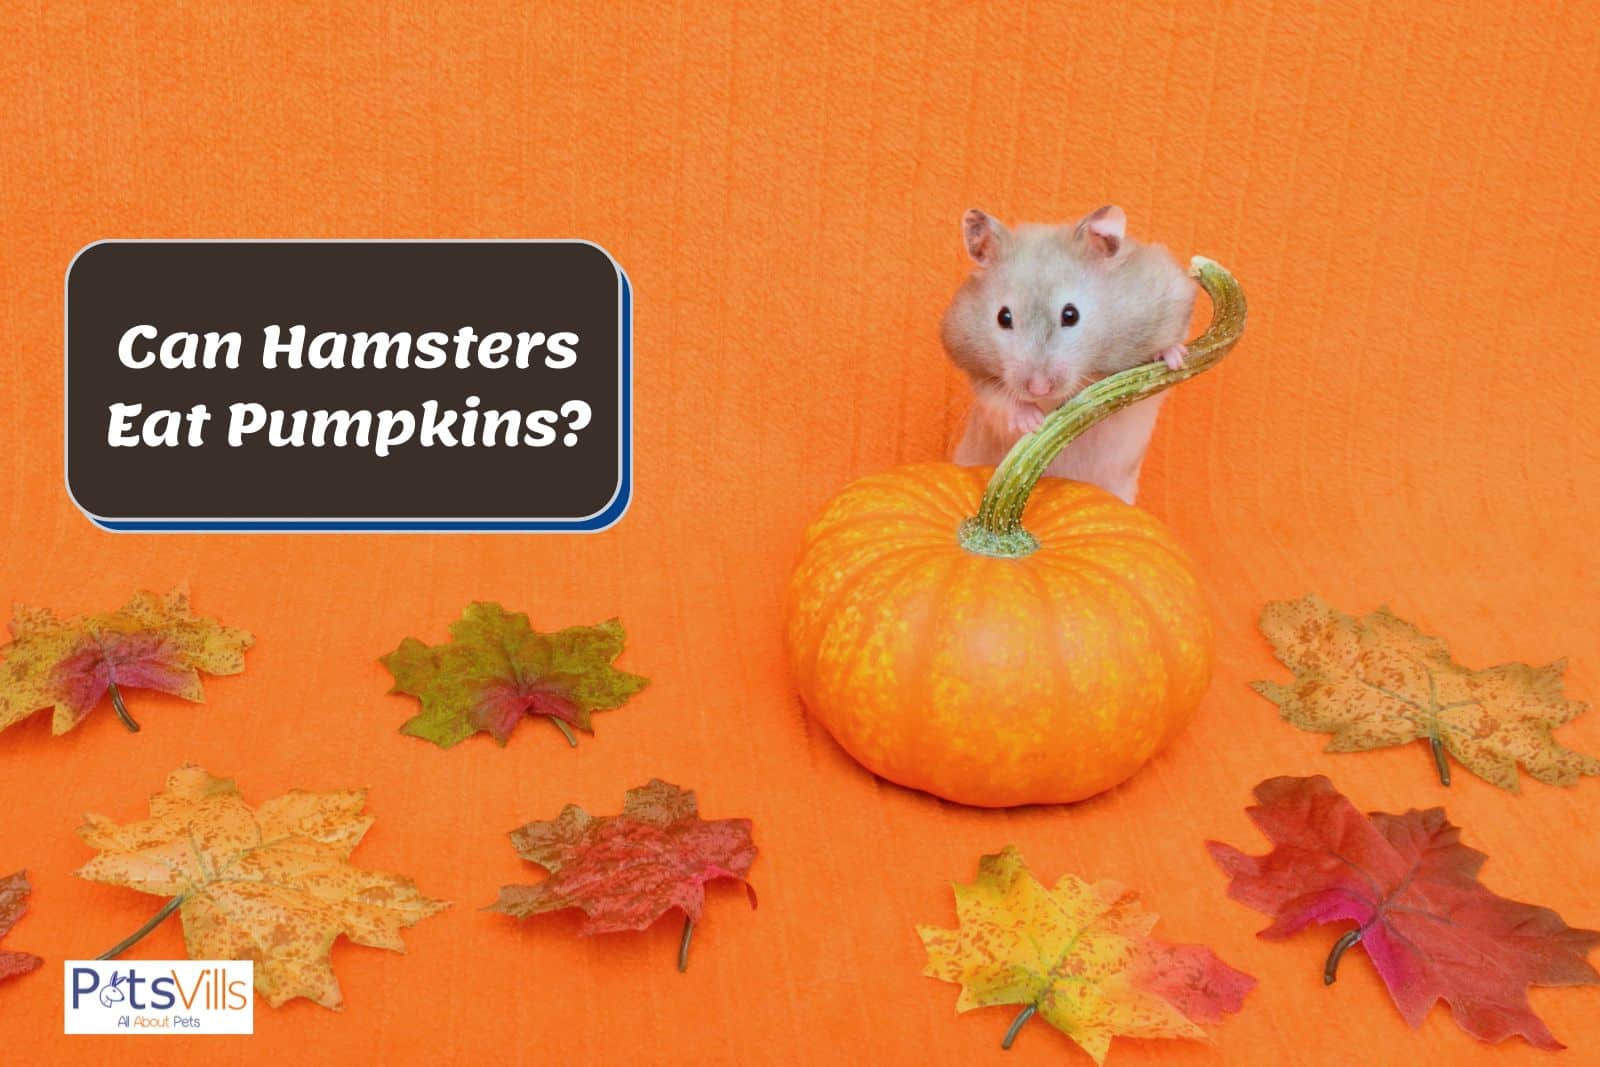 hamster trying to eat pumpkin but can hamsters eat pumpkins